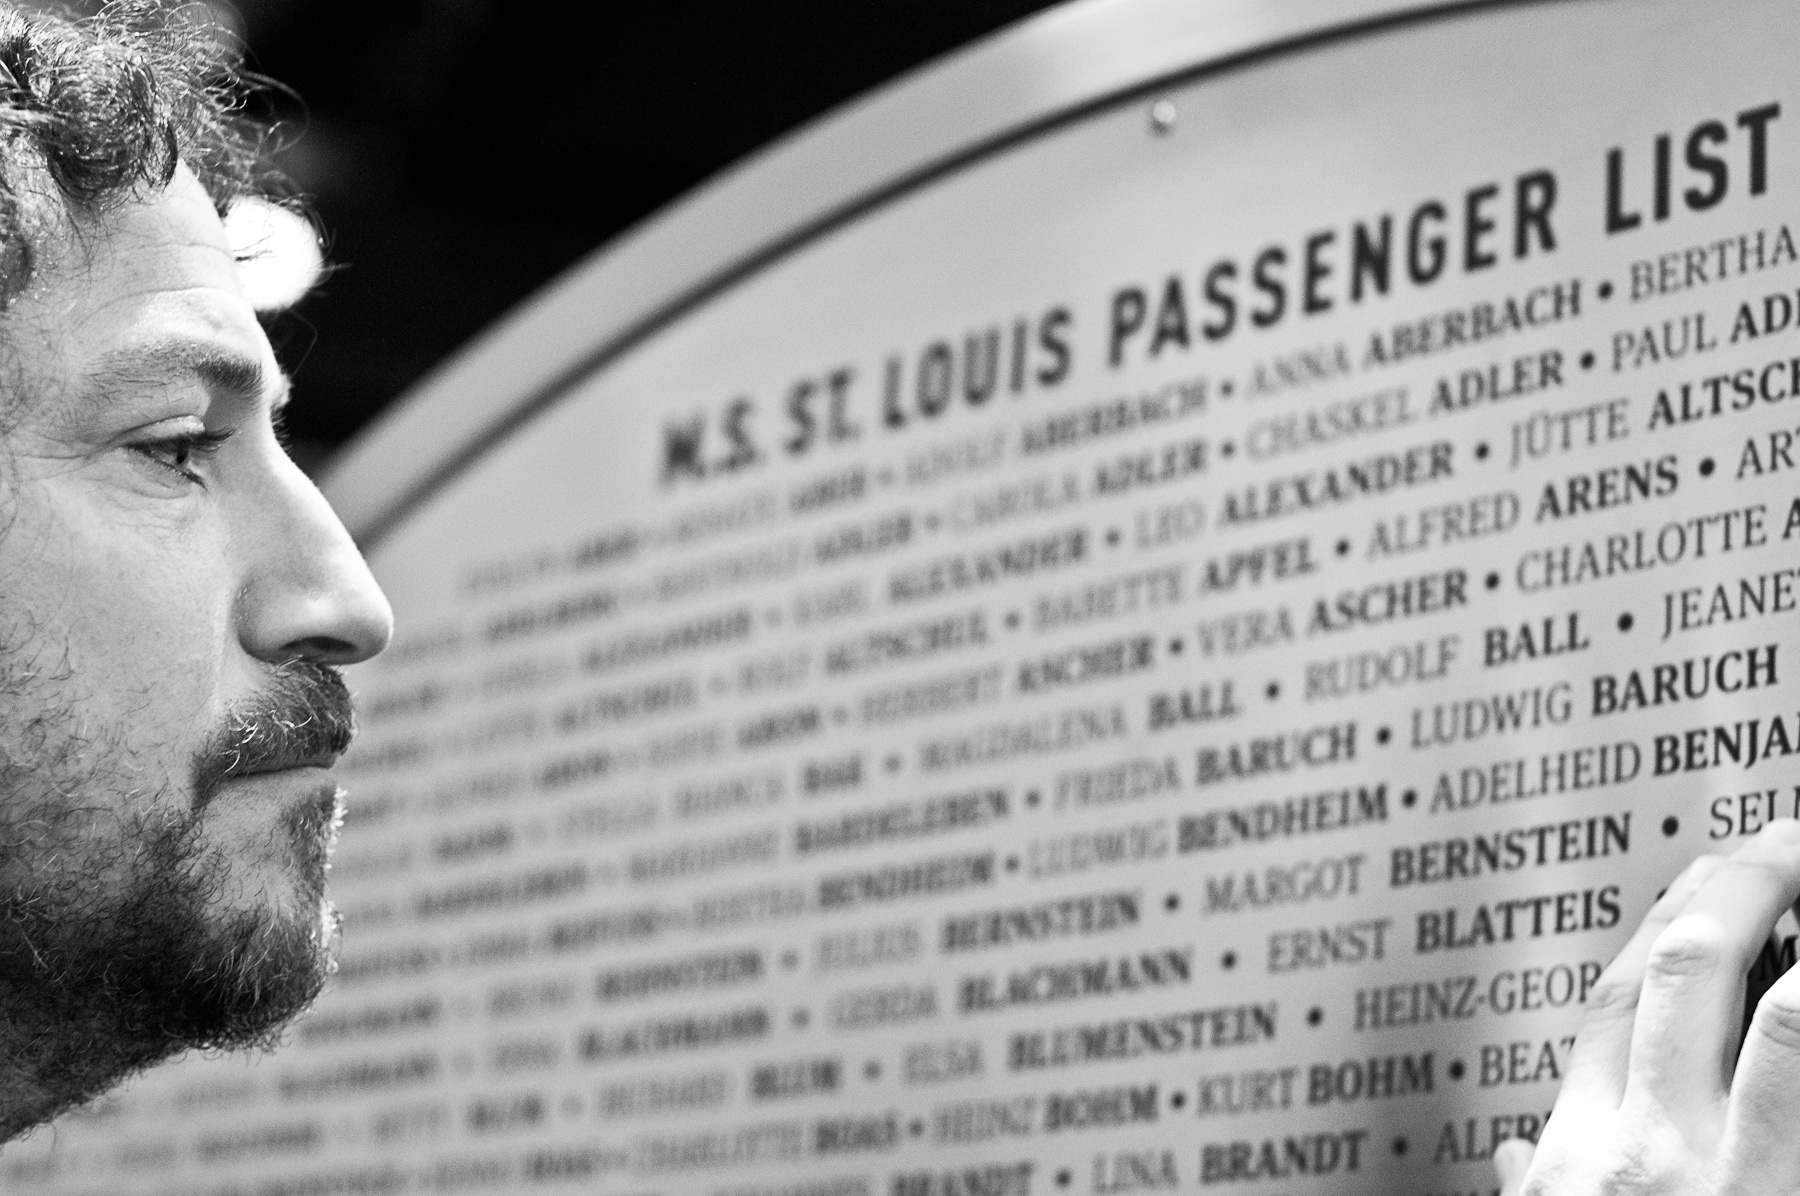 Image showing David reading the names of M.S St. Louis passenger list on the Wheel of Conscience